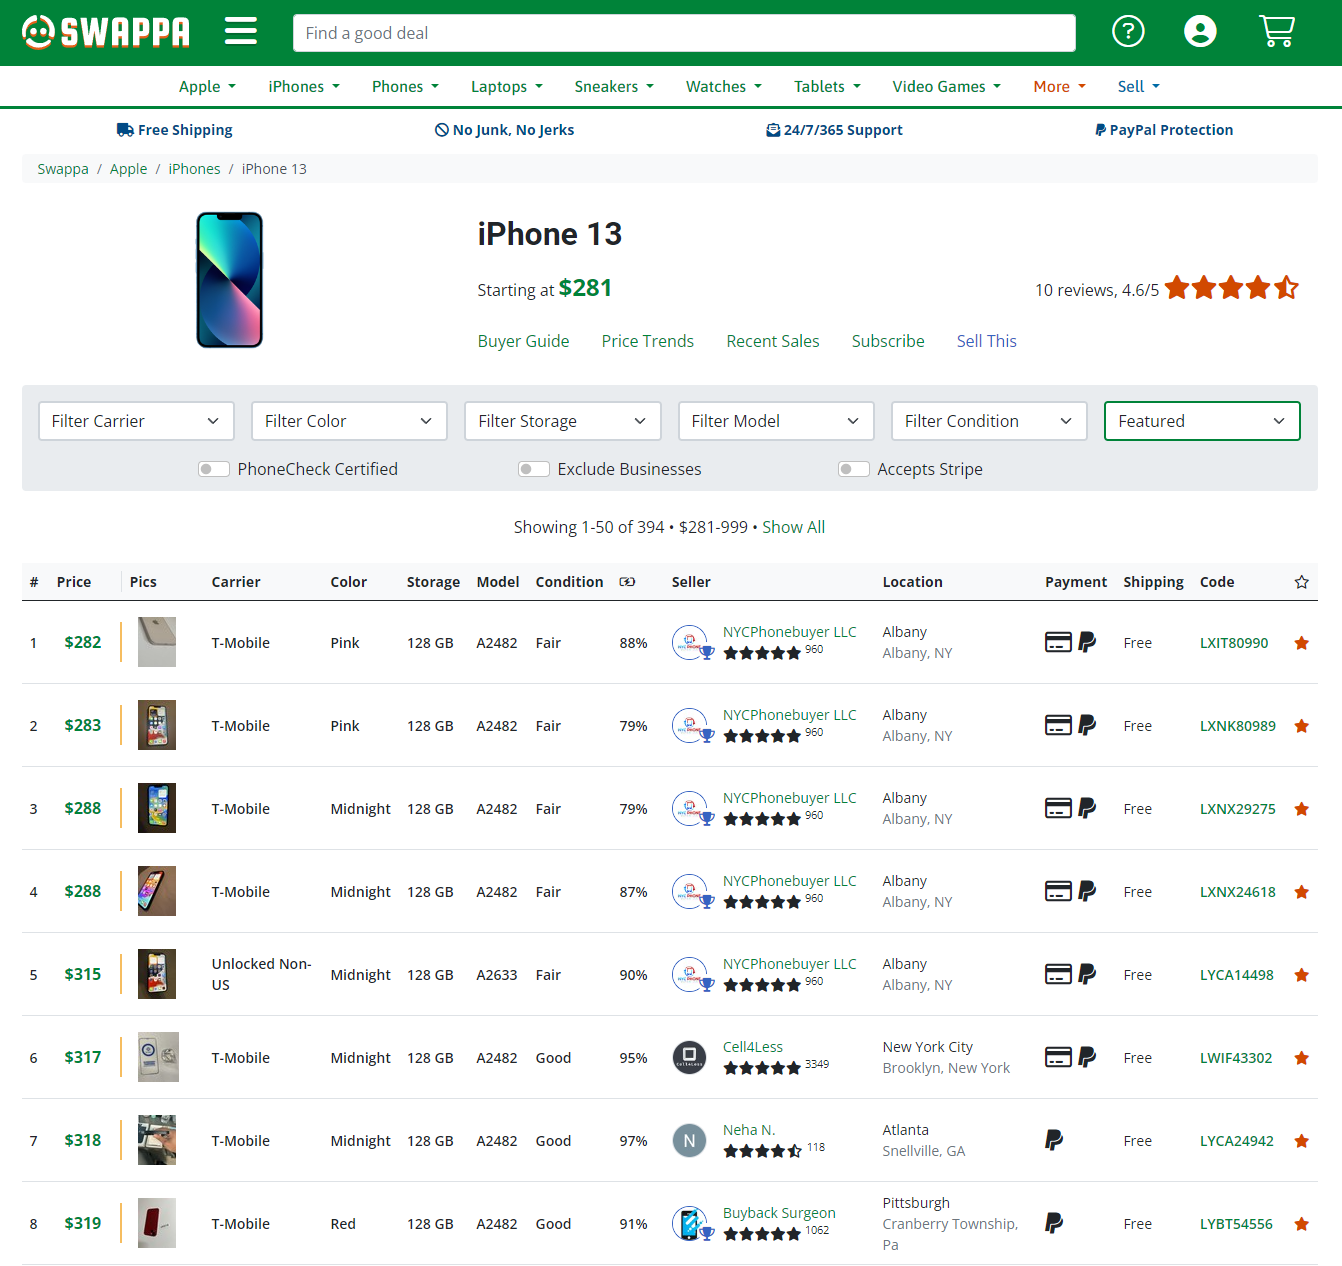 iPhone 13 listings on Swappa